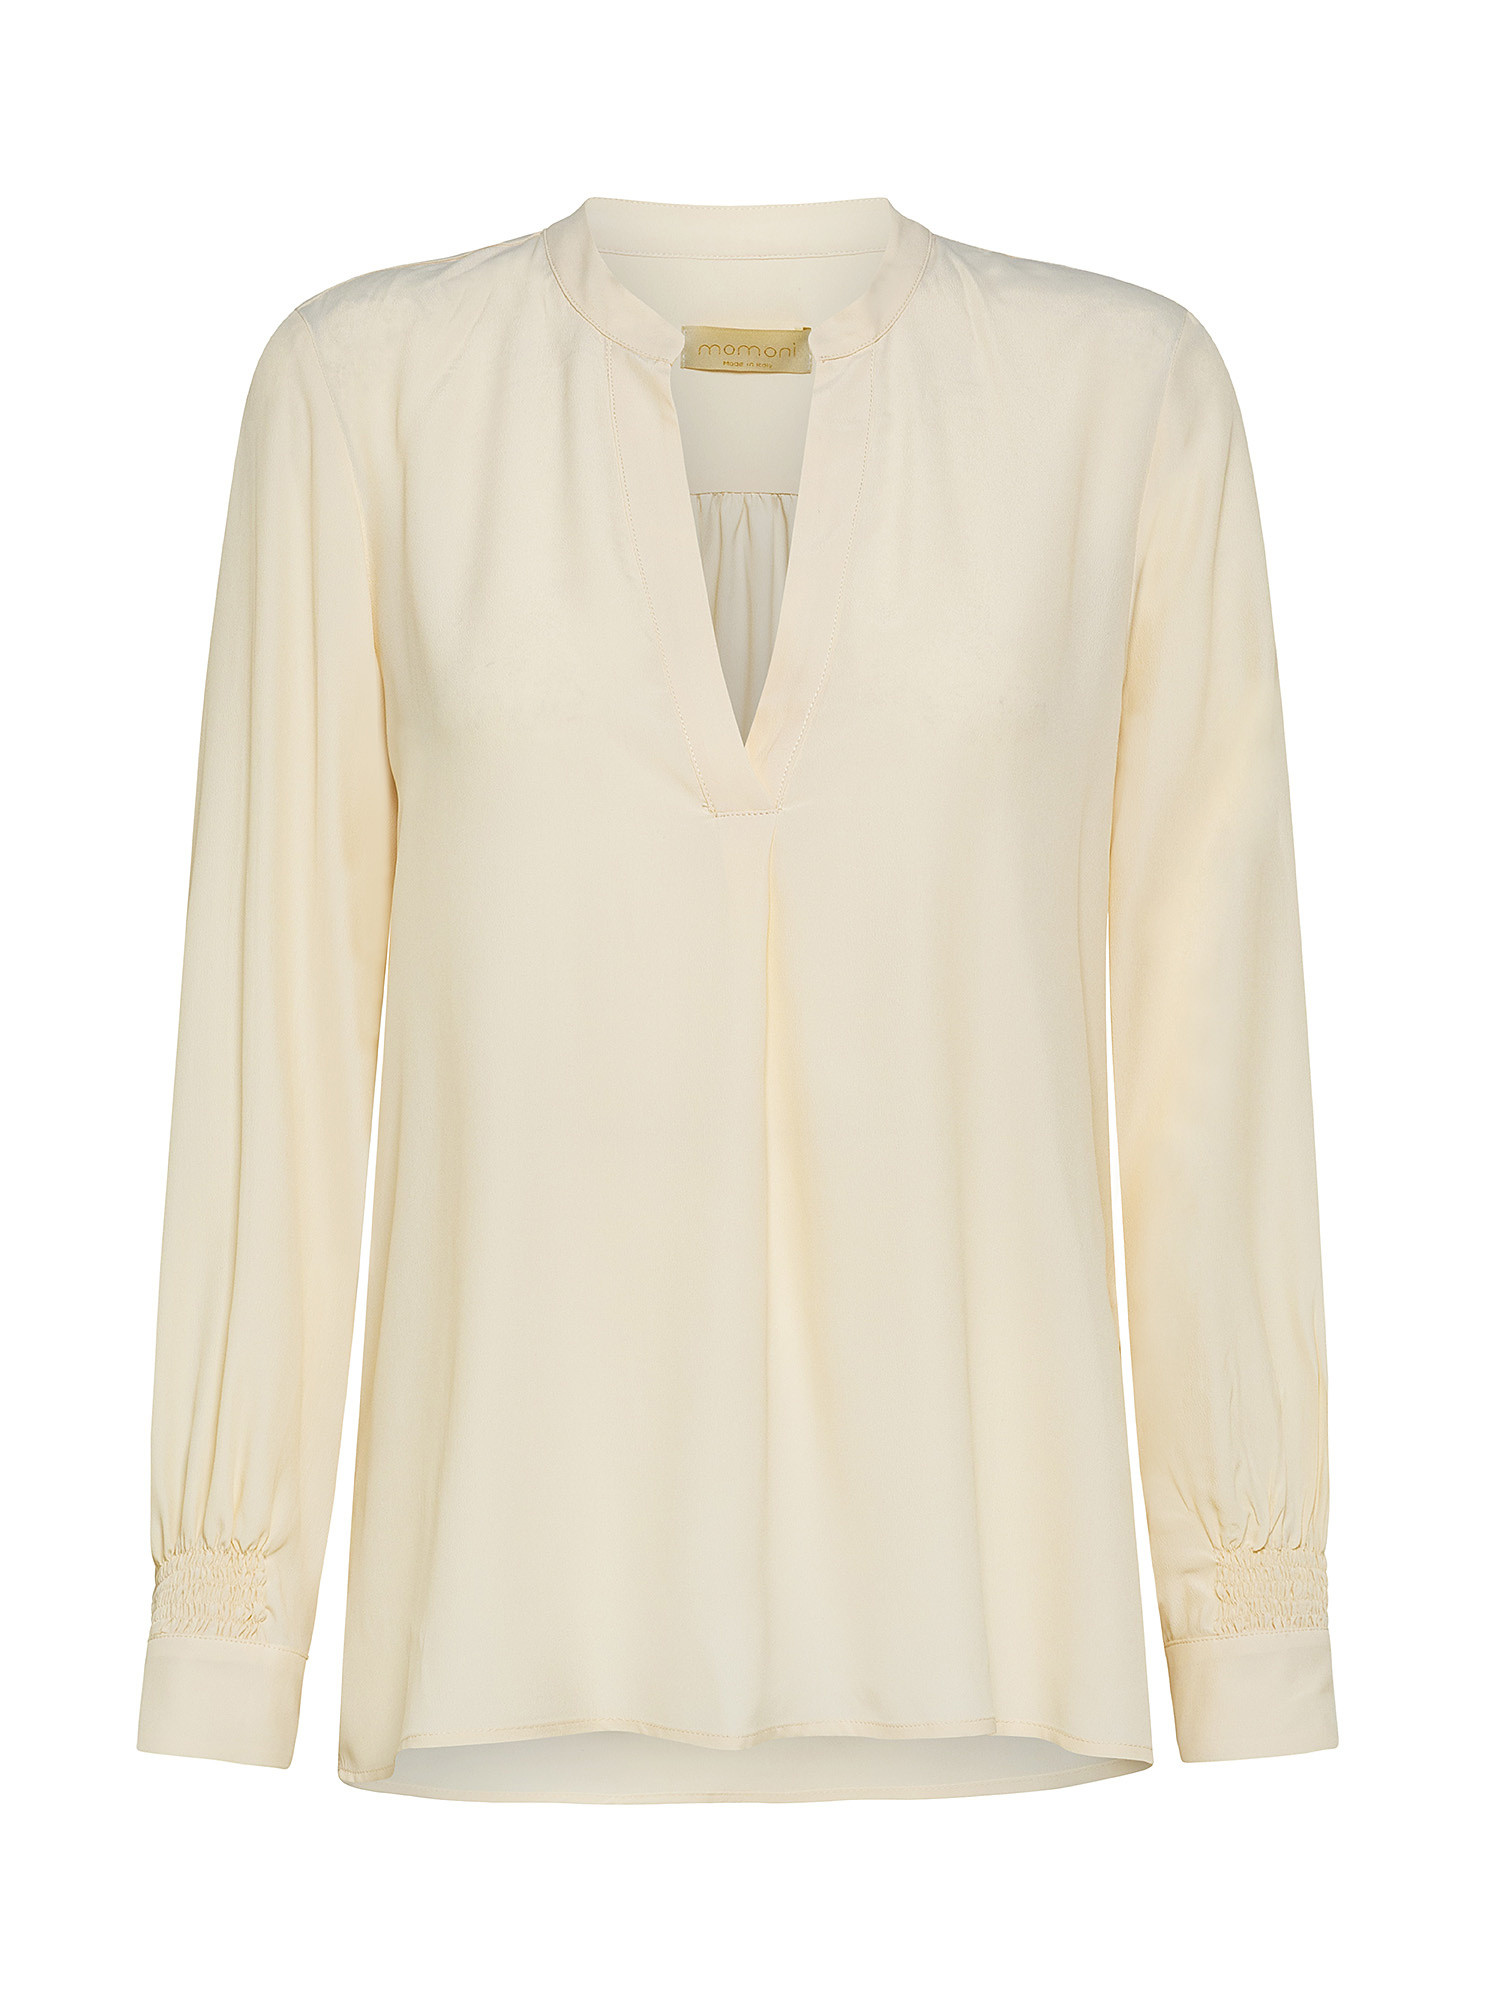 Blusa Angelica, White, large image number 0